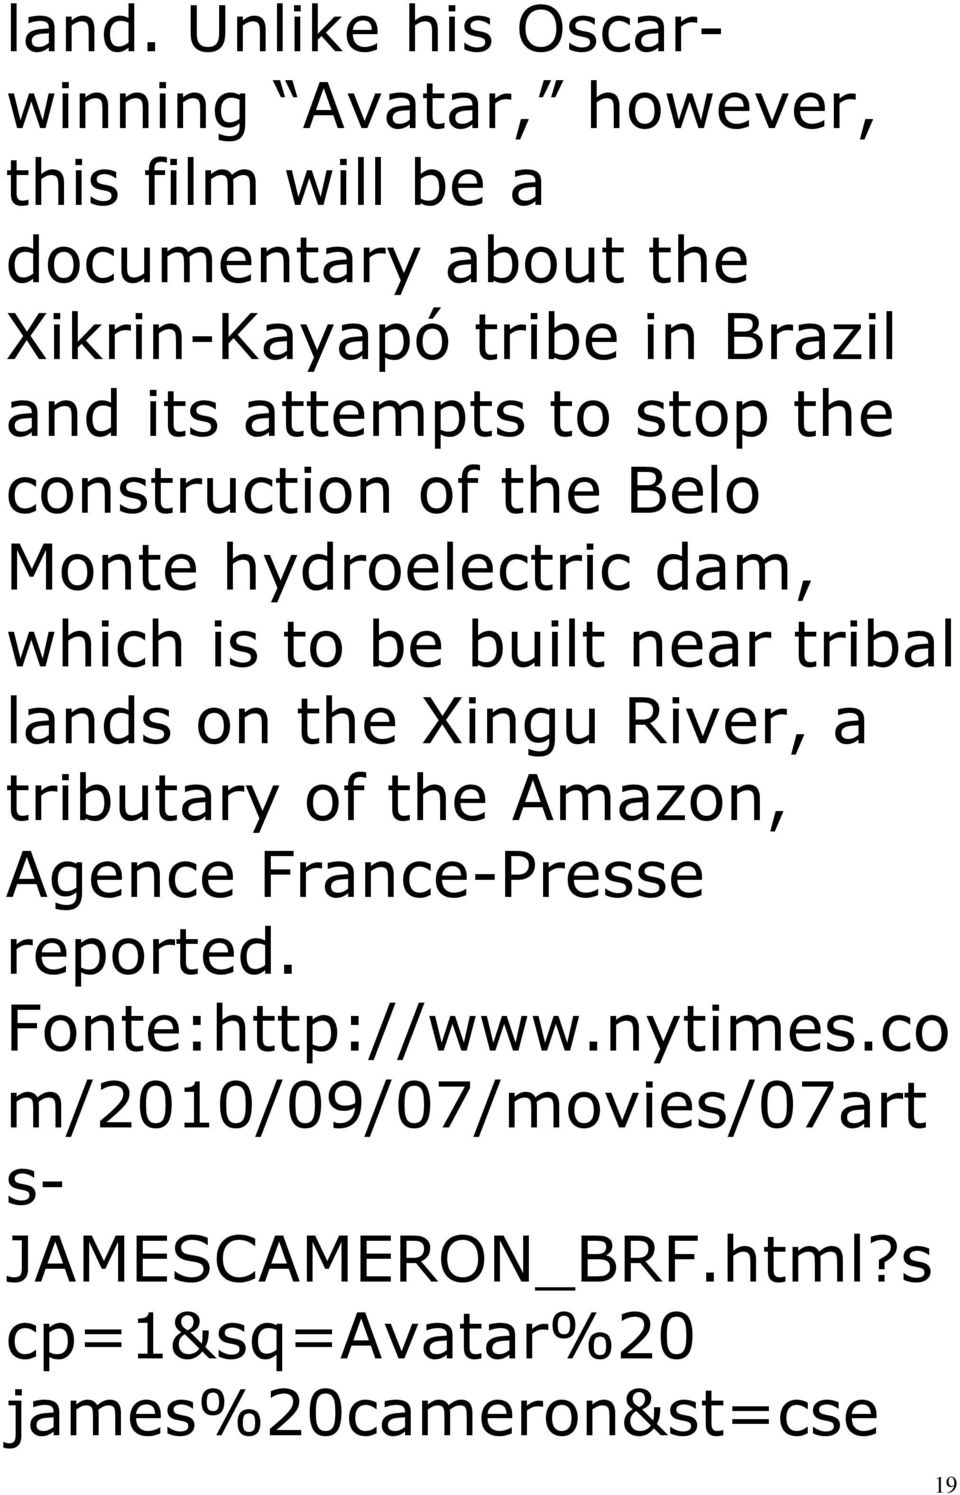 near tribal lands on the Xingu River, a tributary of the Amazon, Agence France-Presse reported.